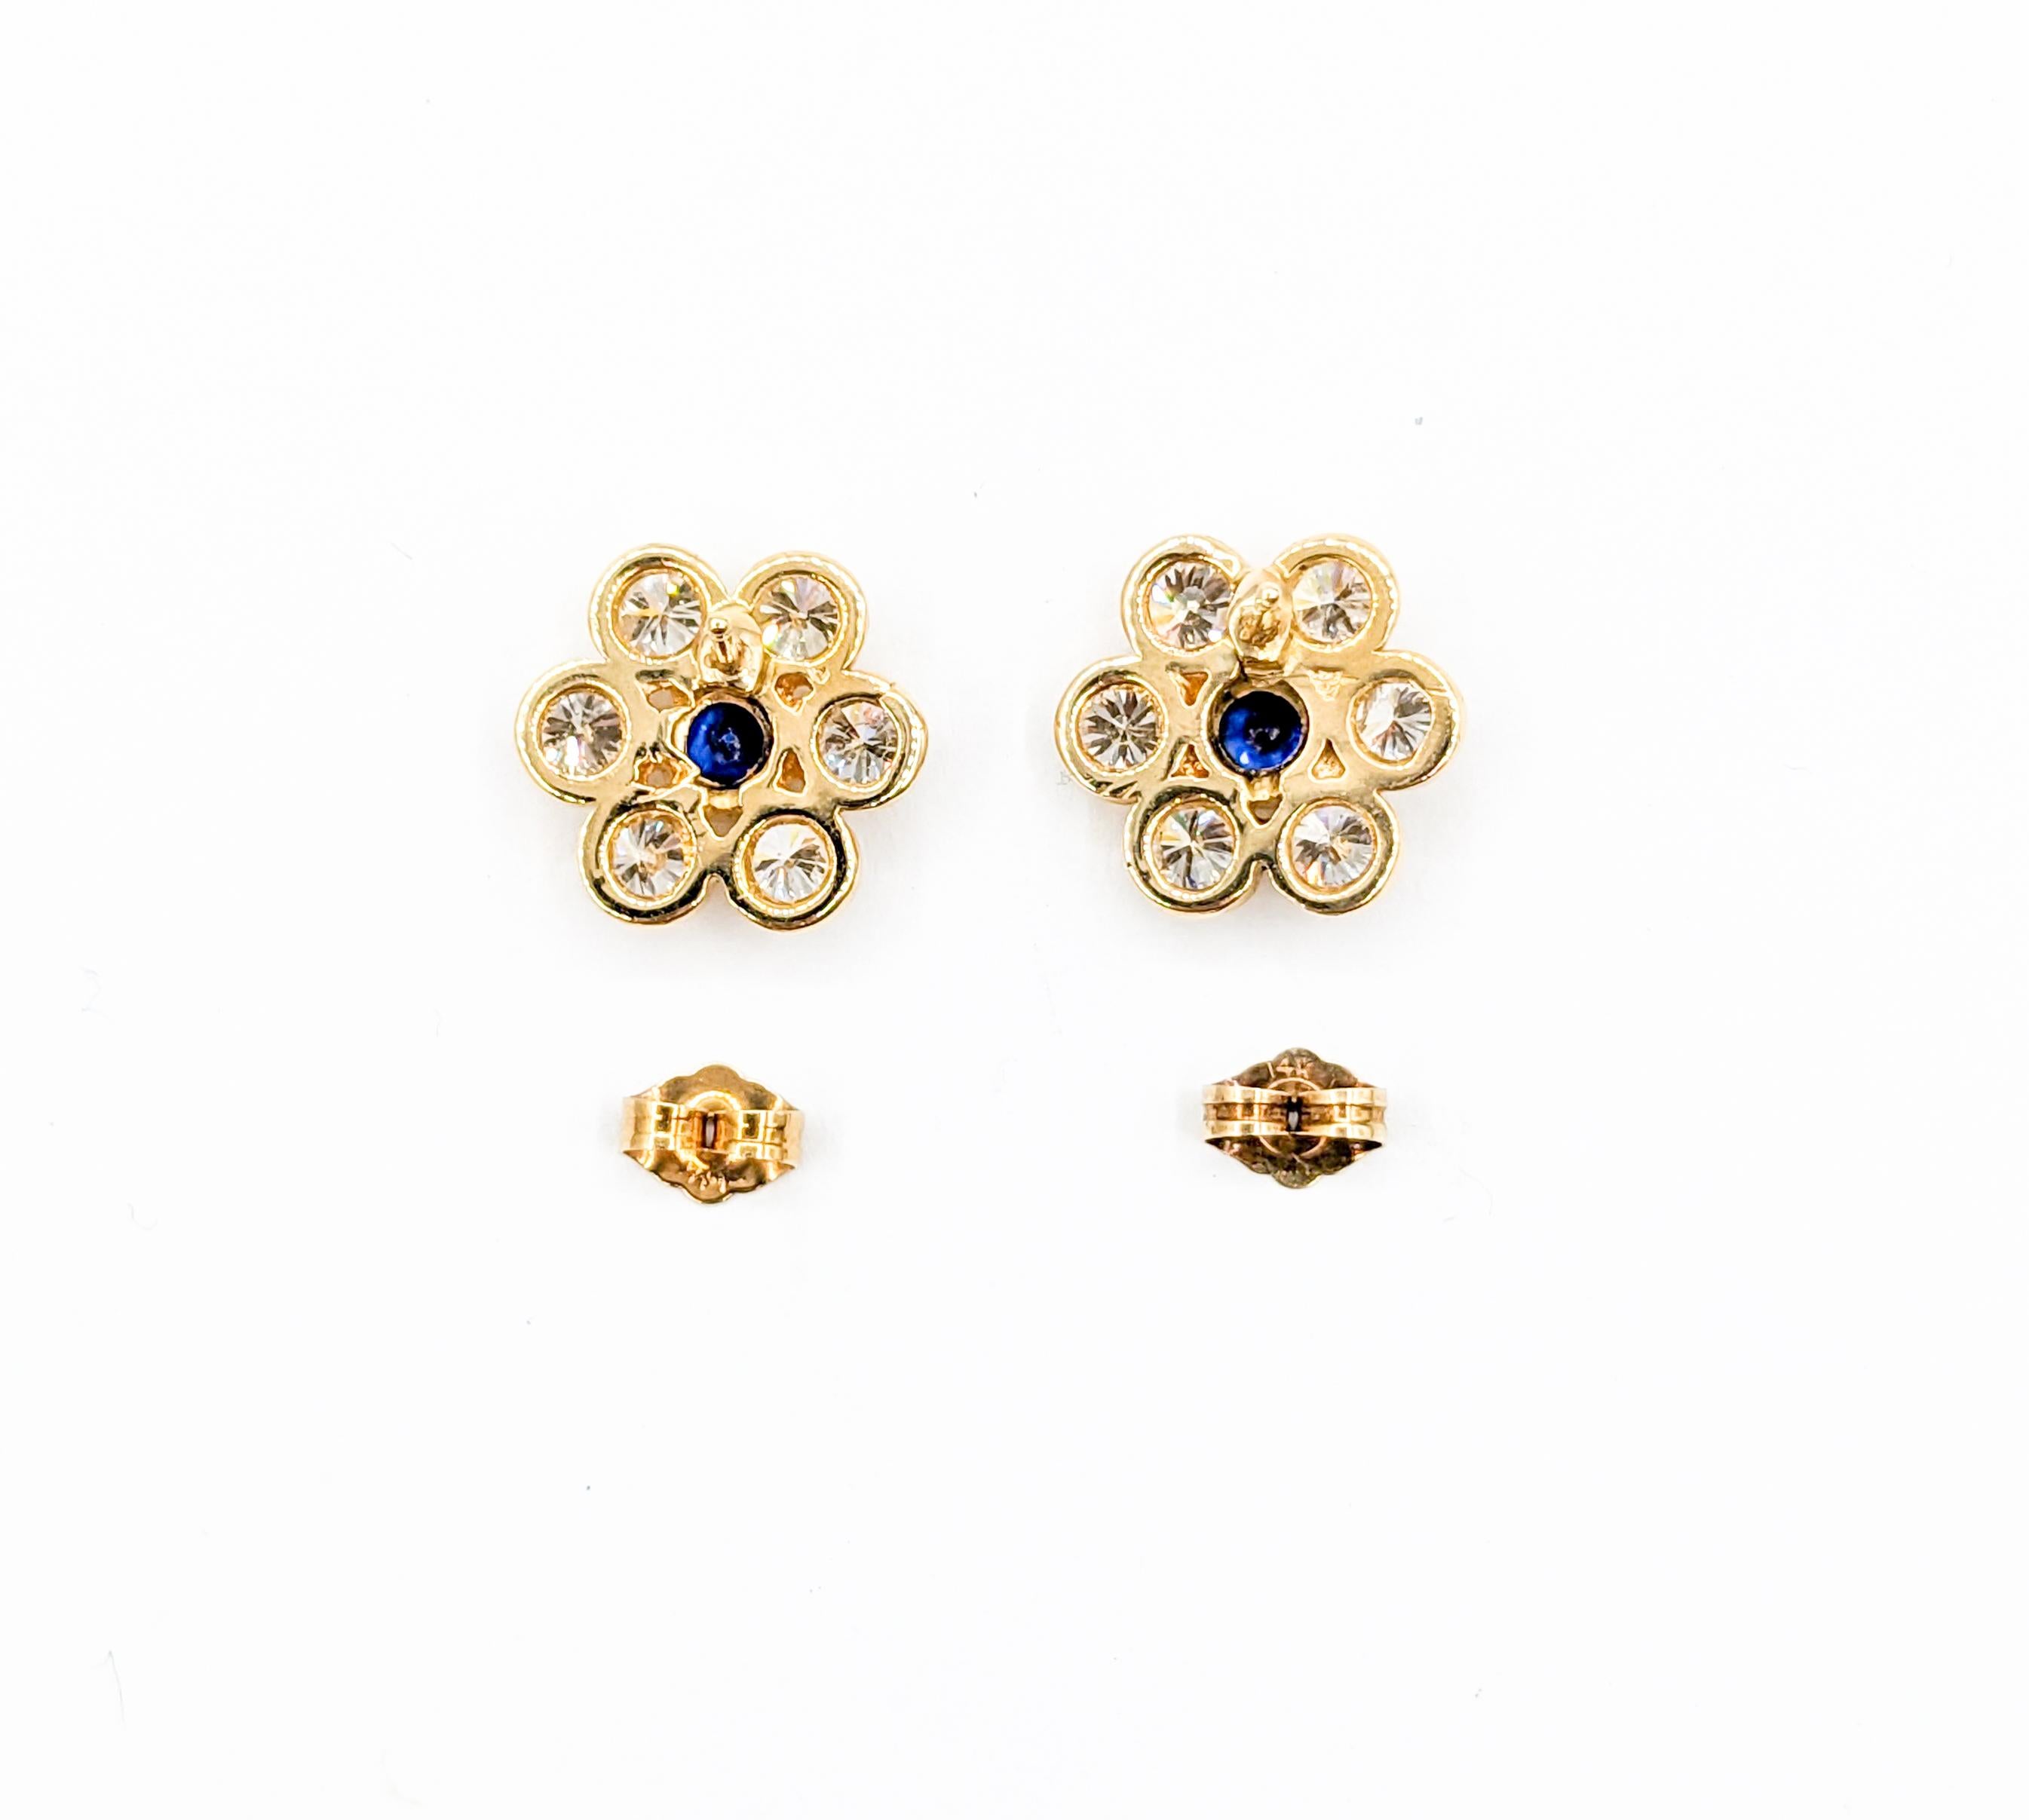 Vintage Diamond & Sapphire Floral Stud Earrings in 14K Gold In Excellent Condition For Sale In Bloomington, MN